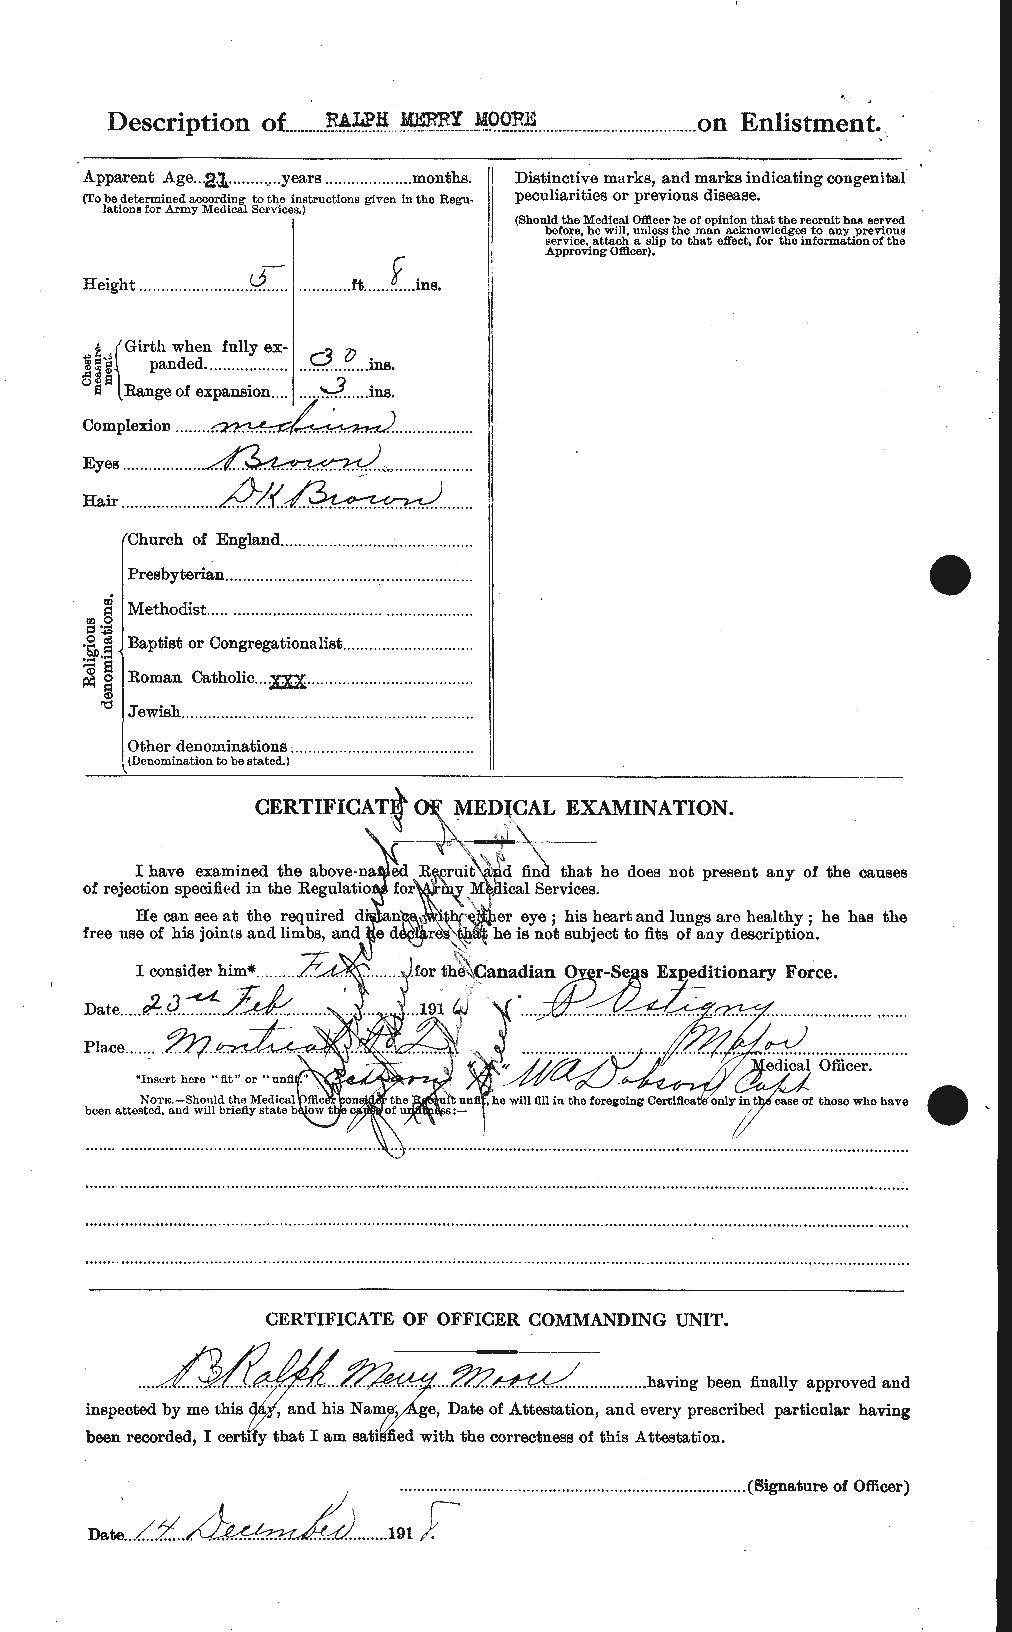 Personnel Records of the First World War - CEF 503508b